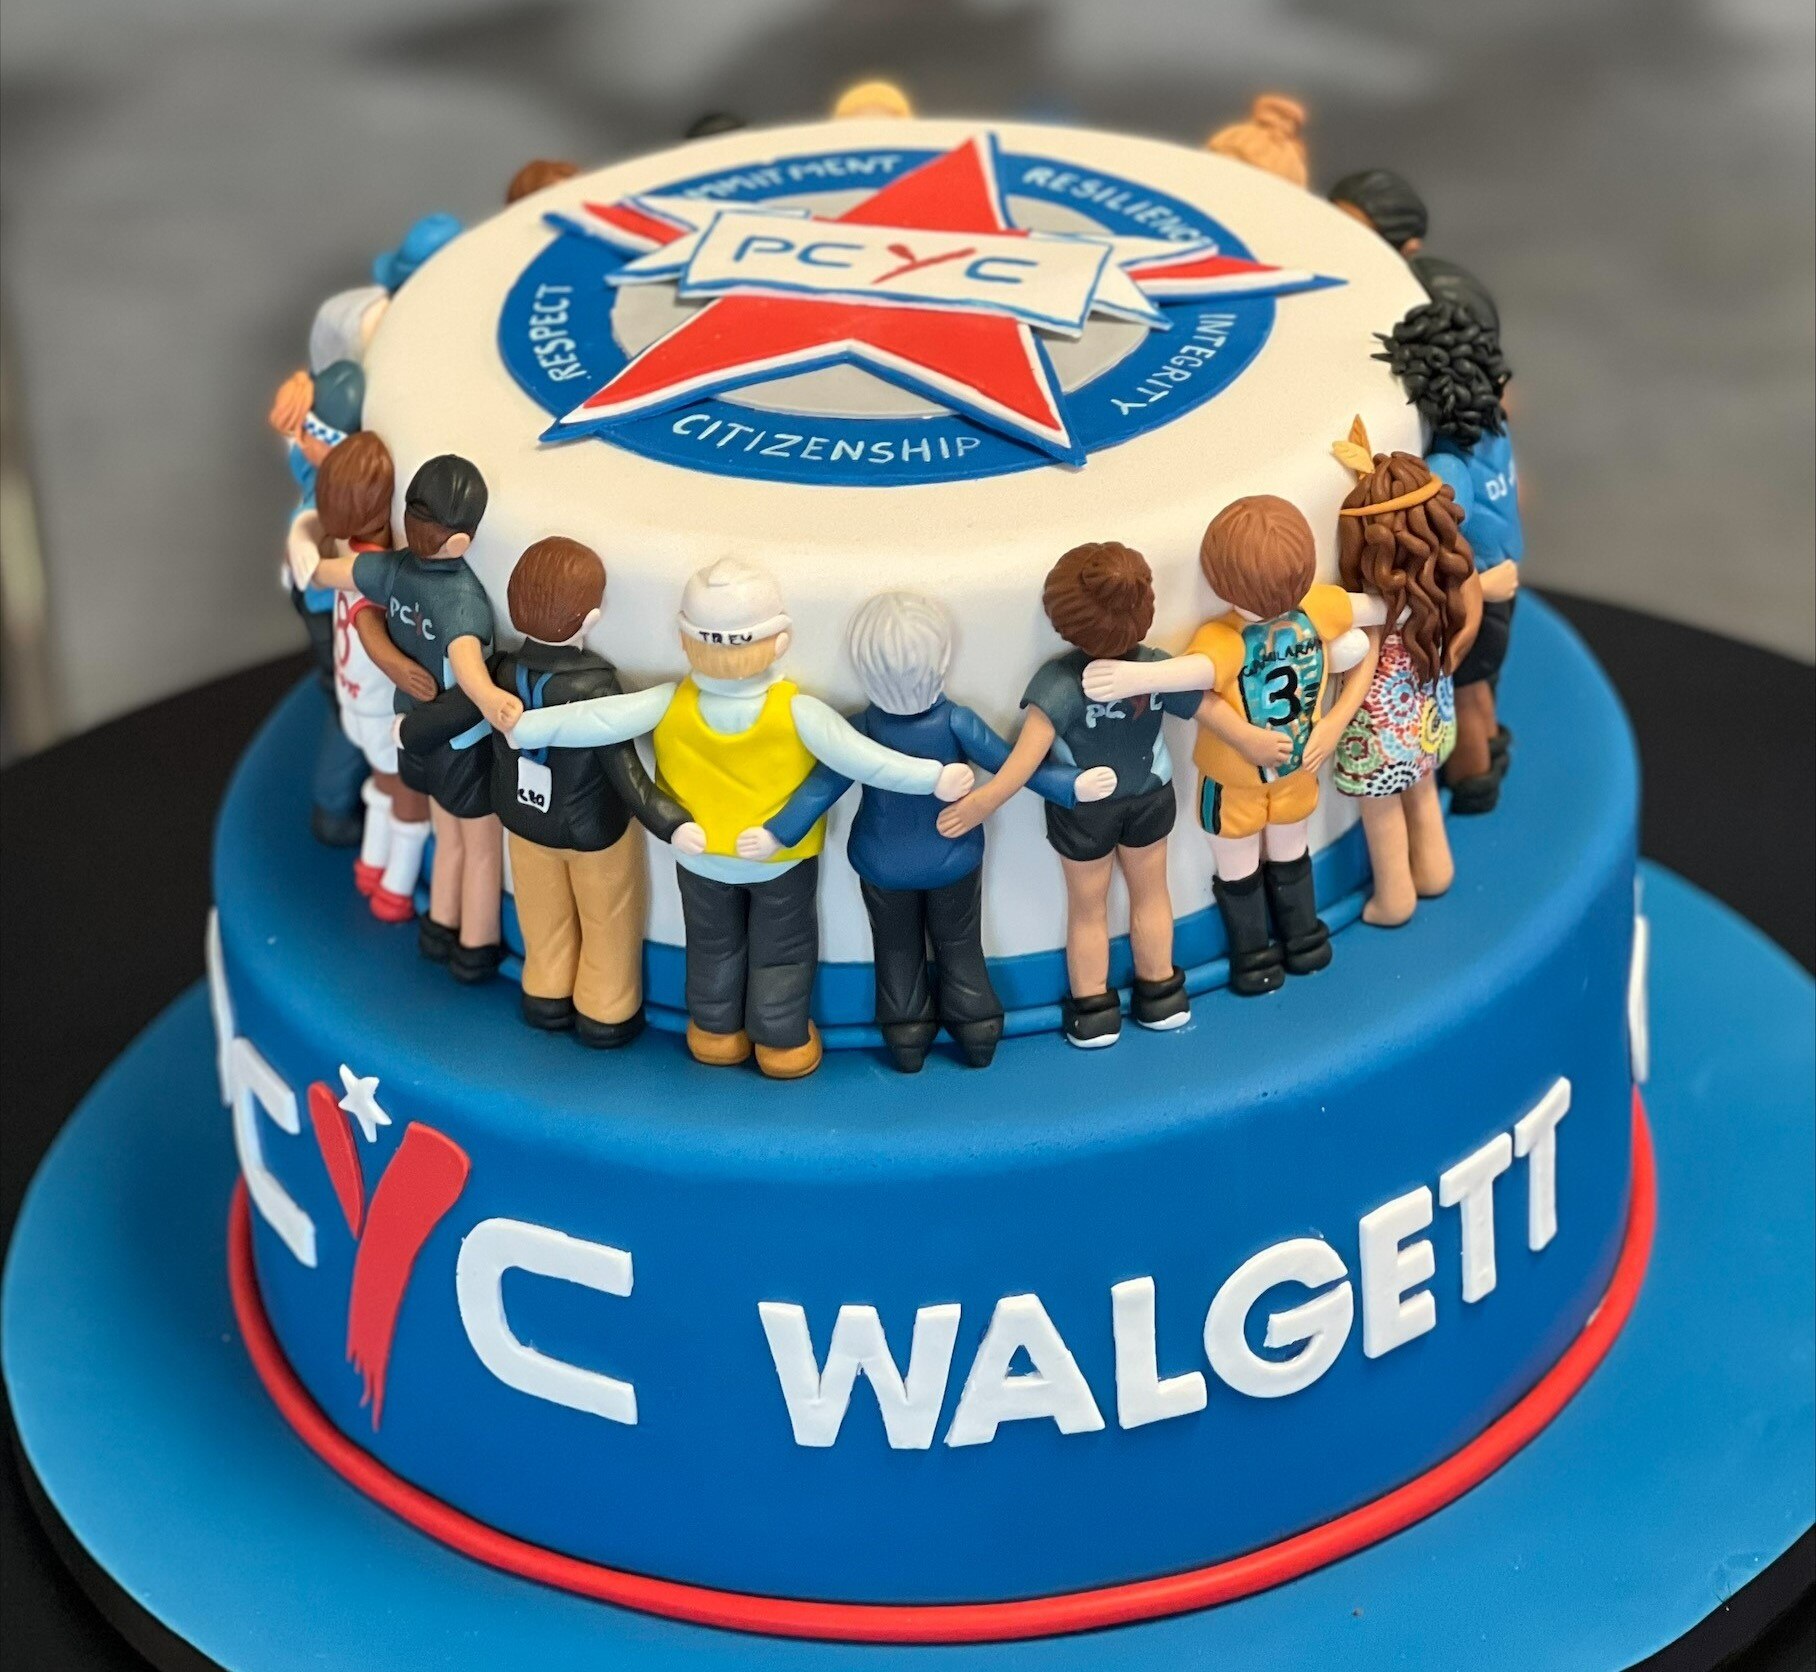 An eleaborately decorated cake with "PCYC Walgett" written on it in icing.